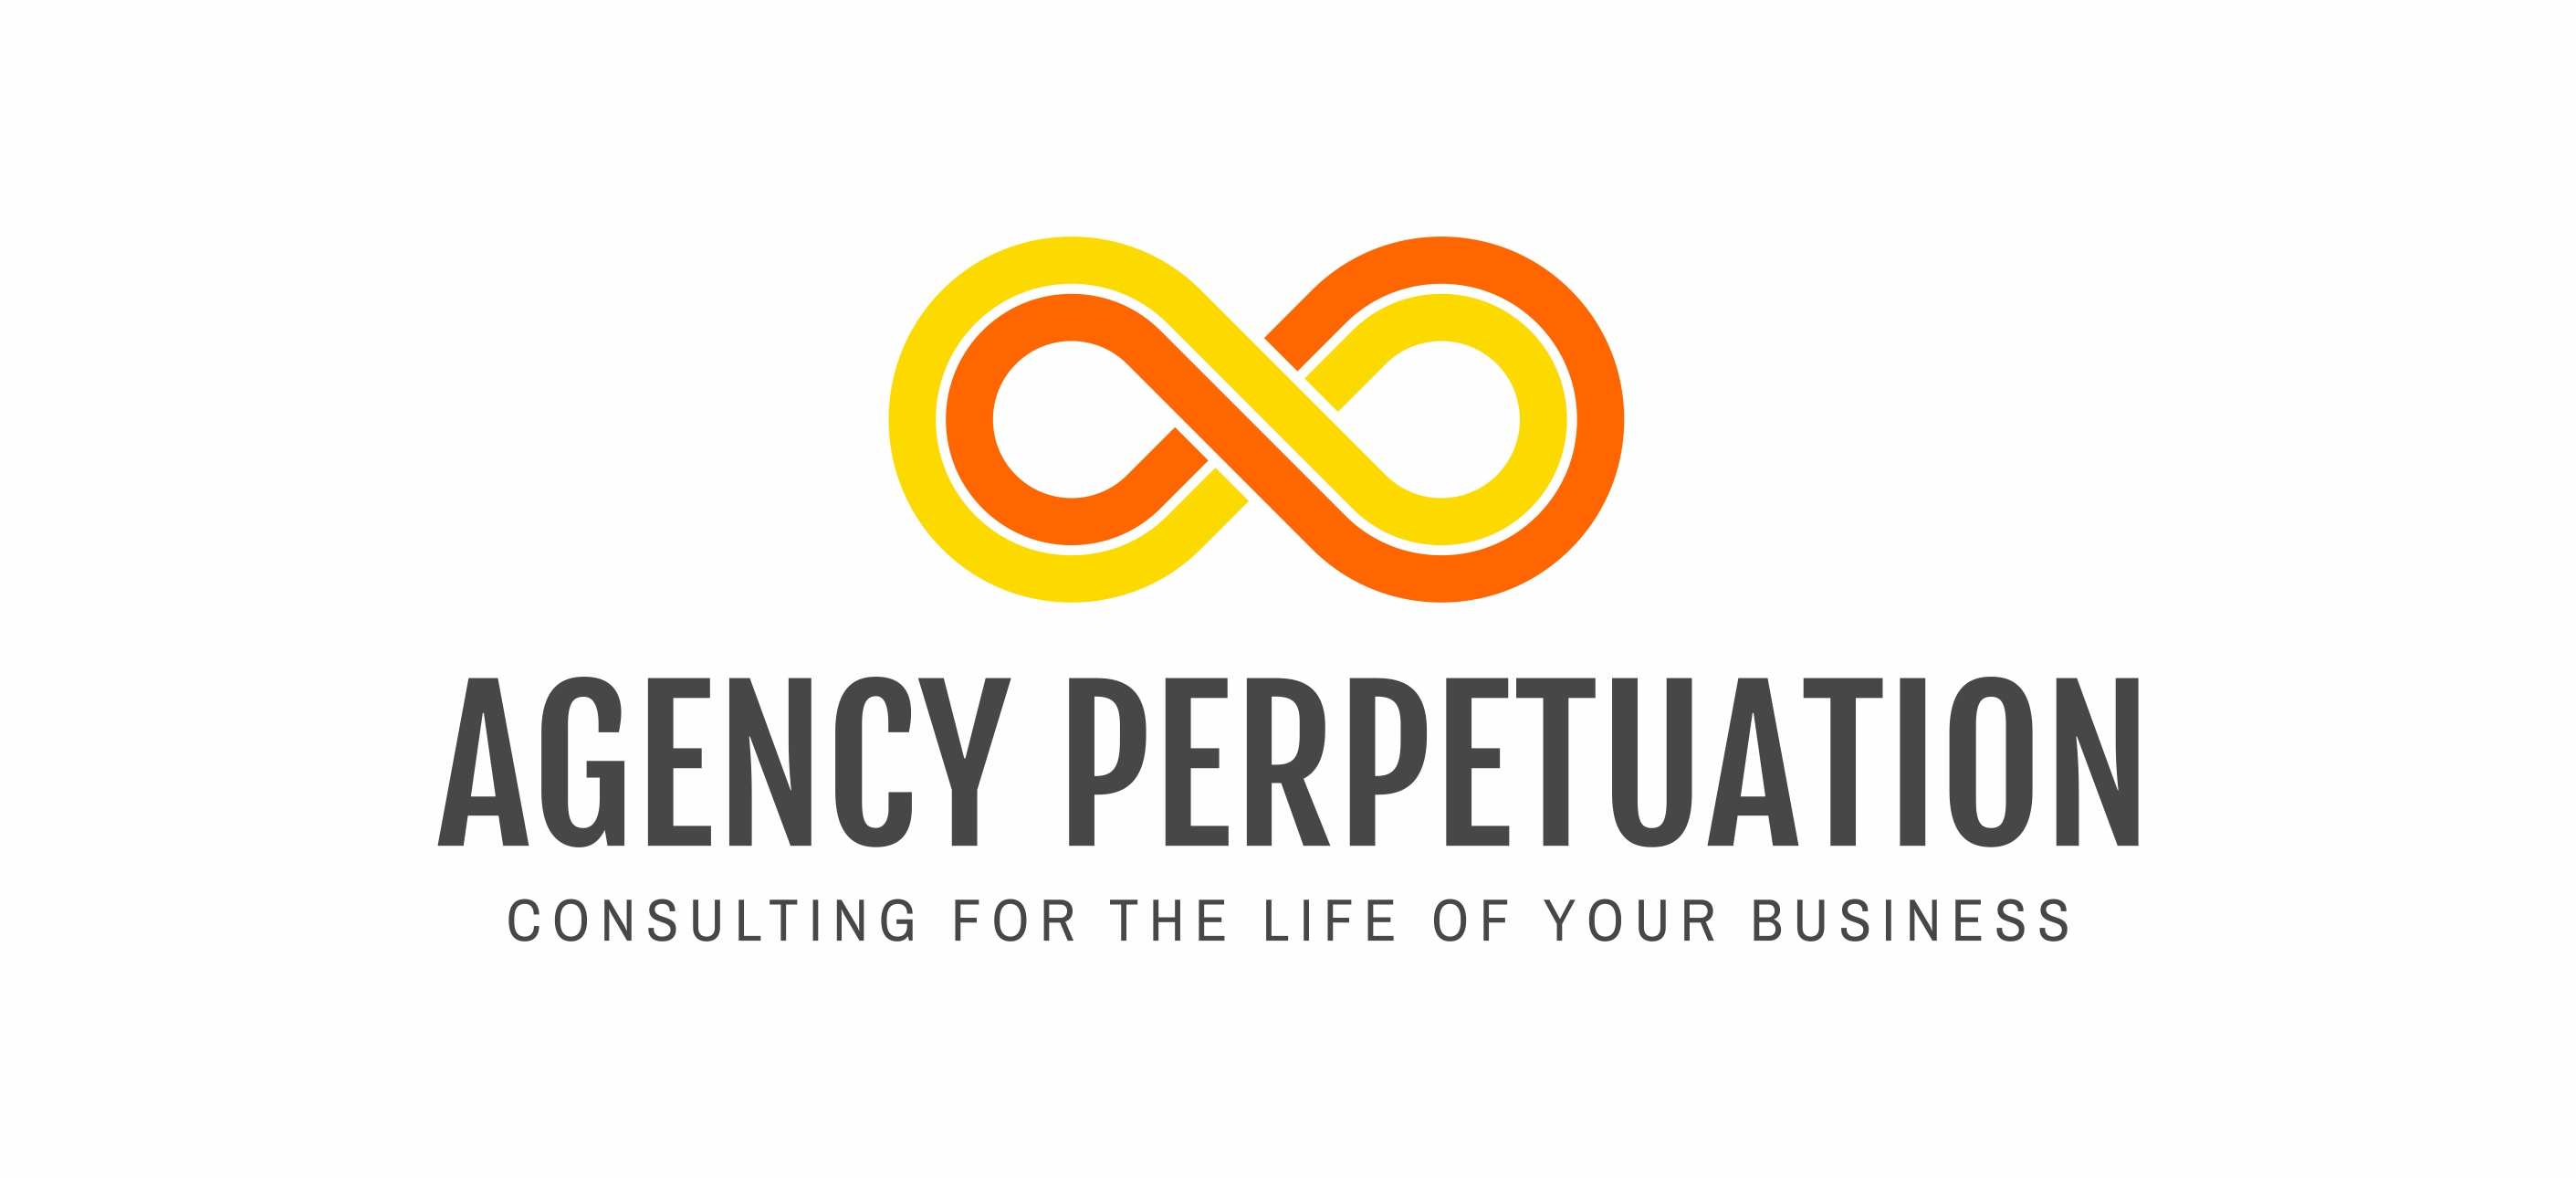 Agency Perpetuation